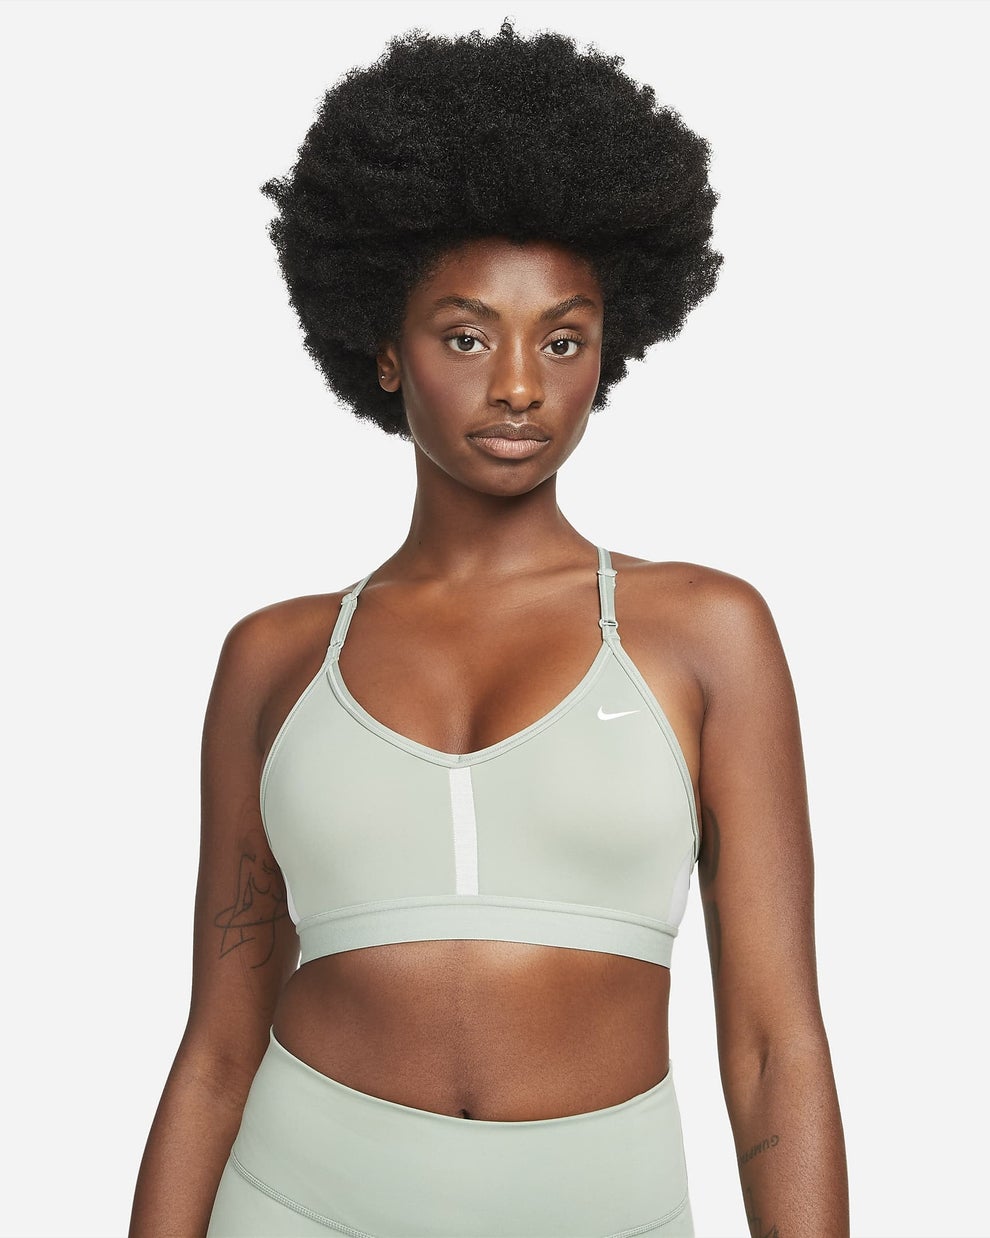 How to Measure Your Nike Sports Bra Size. Nike SI